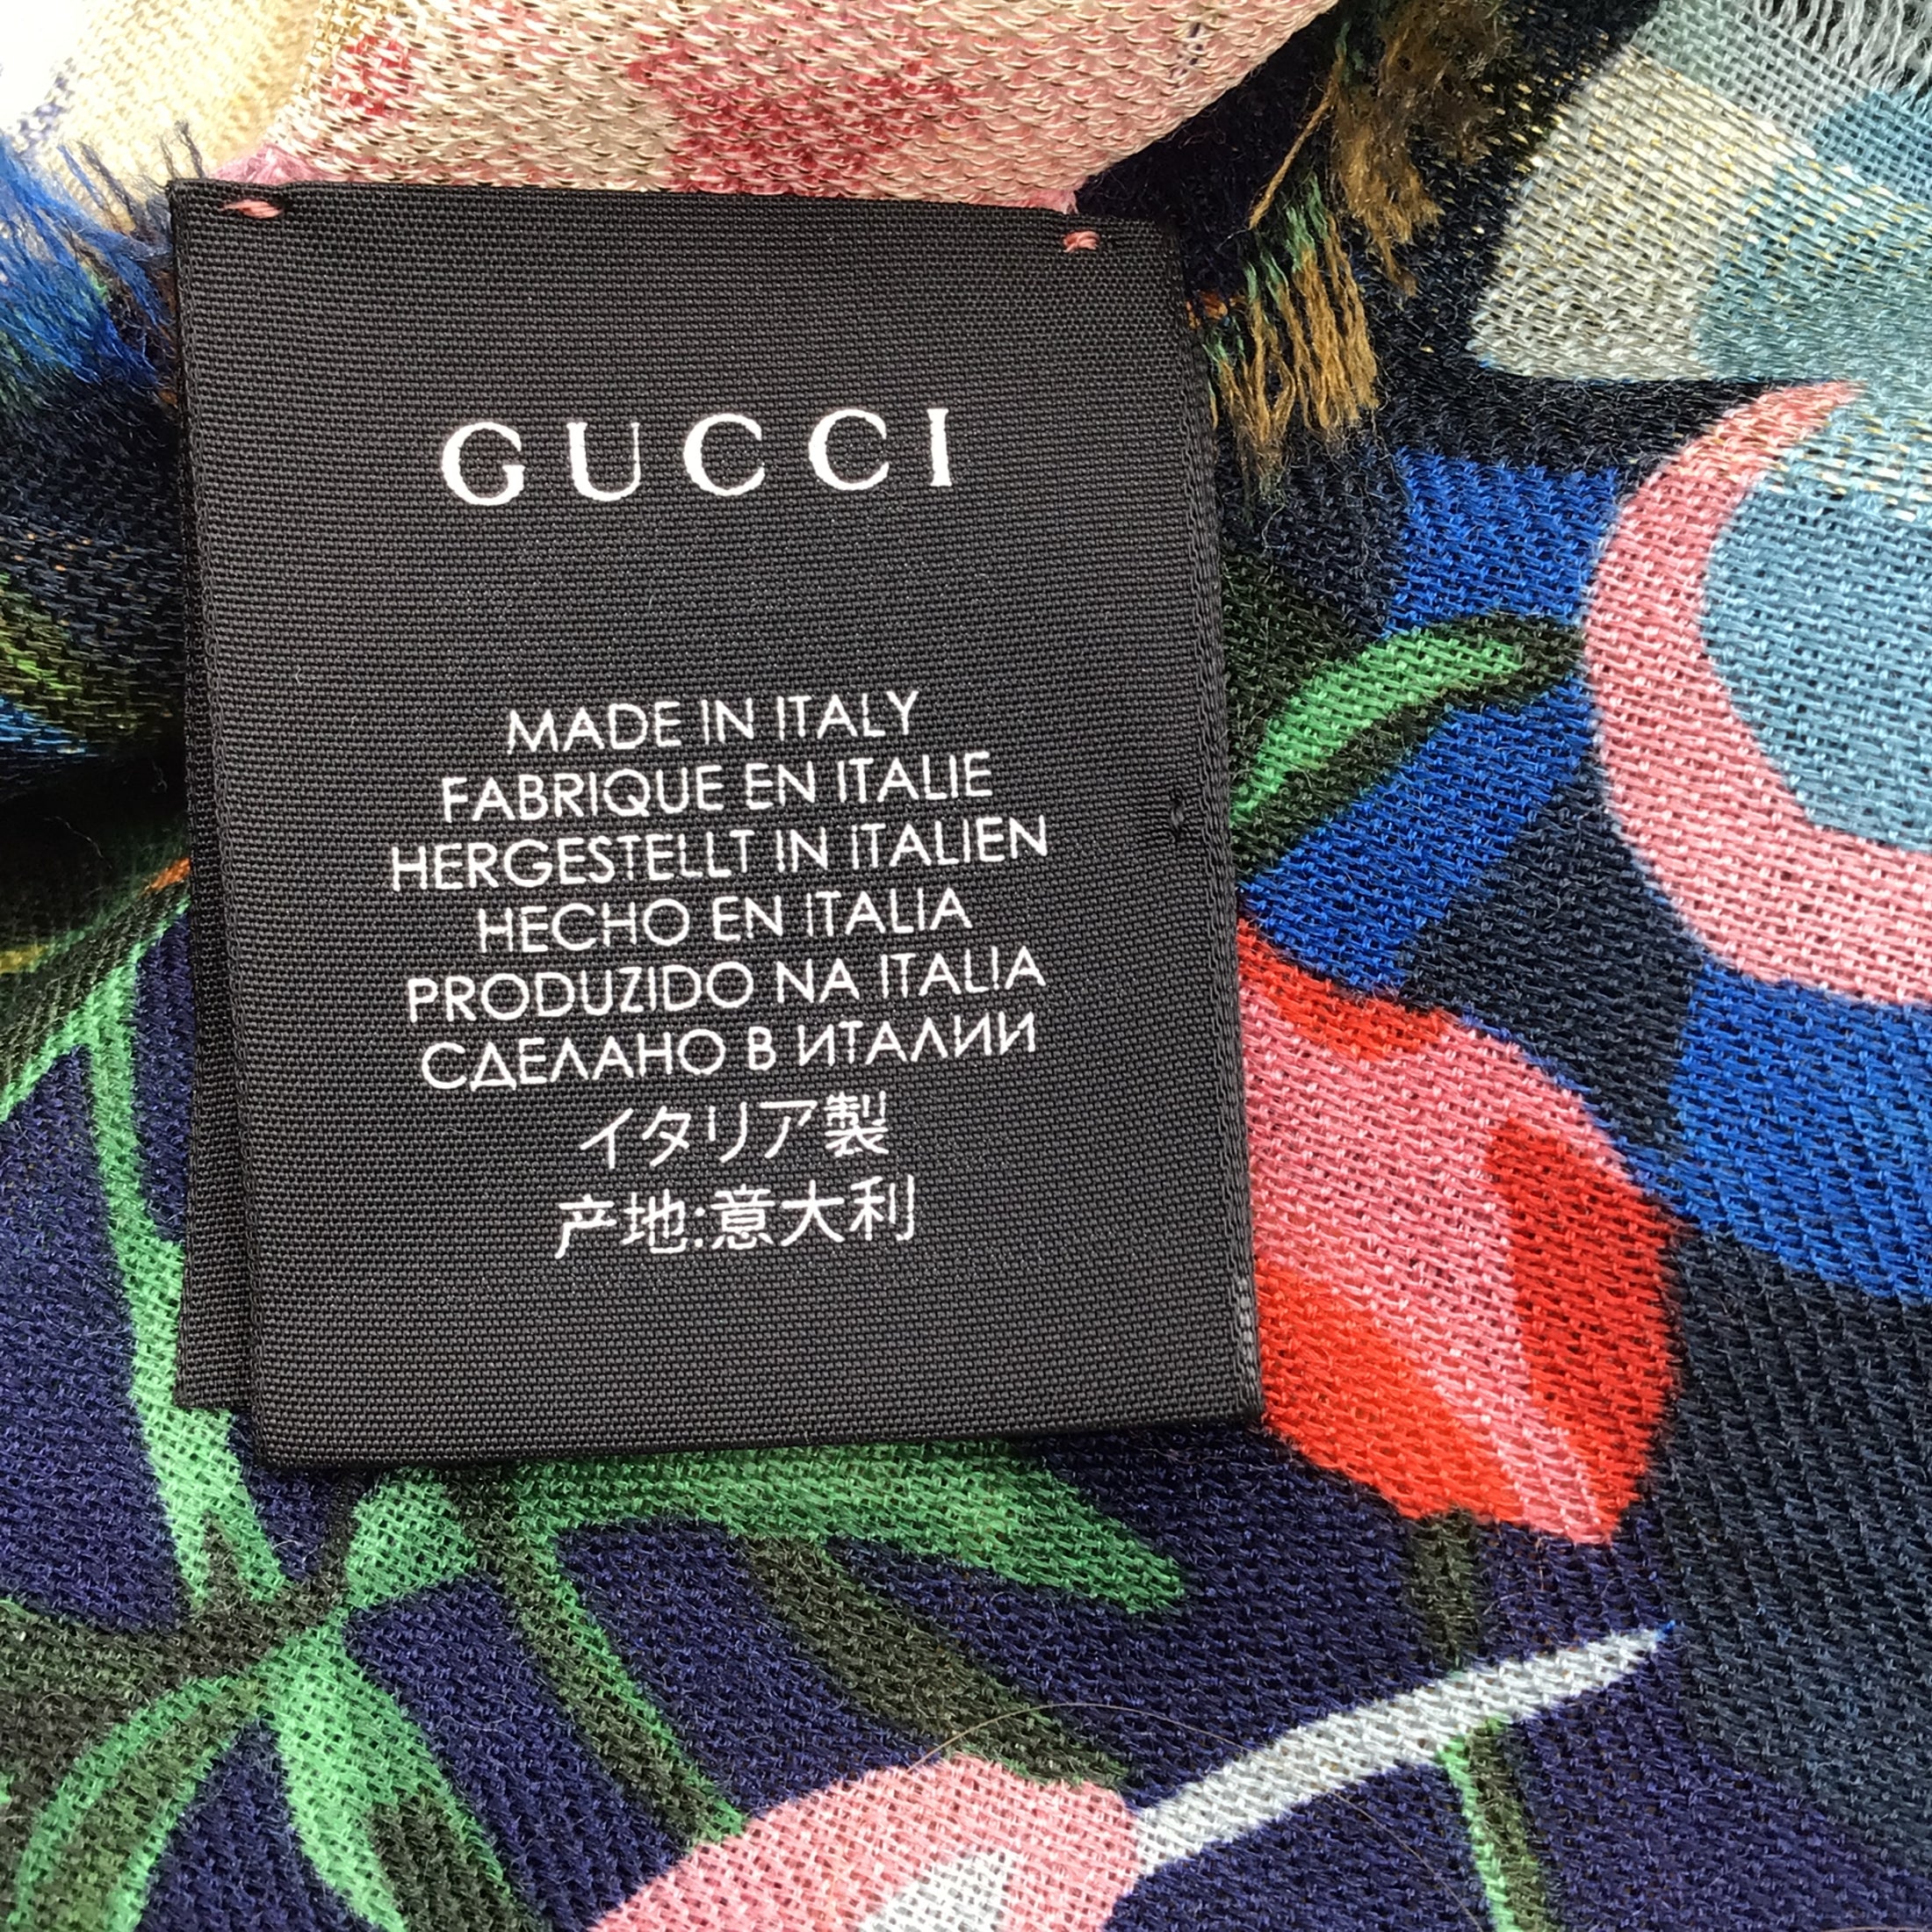 Gucci Navy Blue Multi Josephine Floral Printed Wool and Silk Scarf